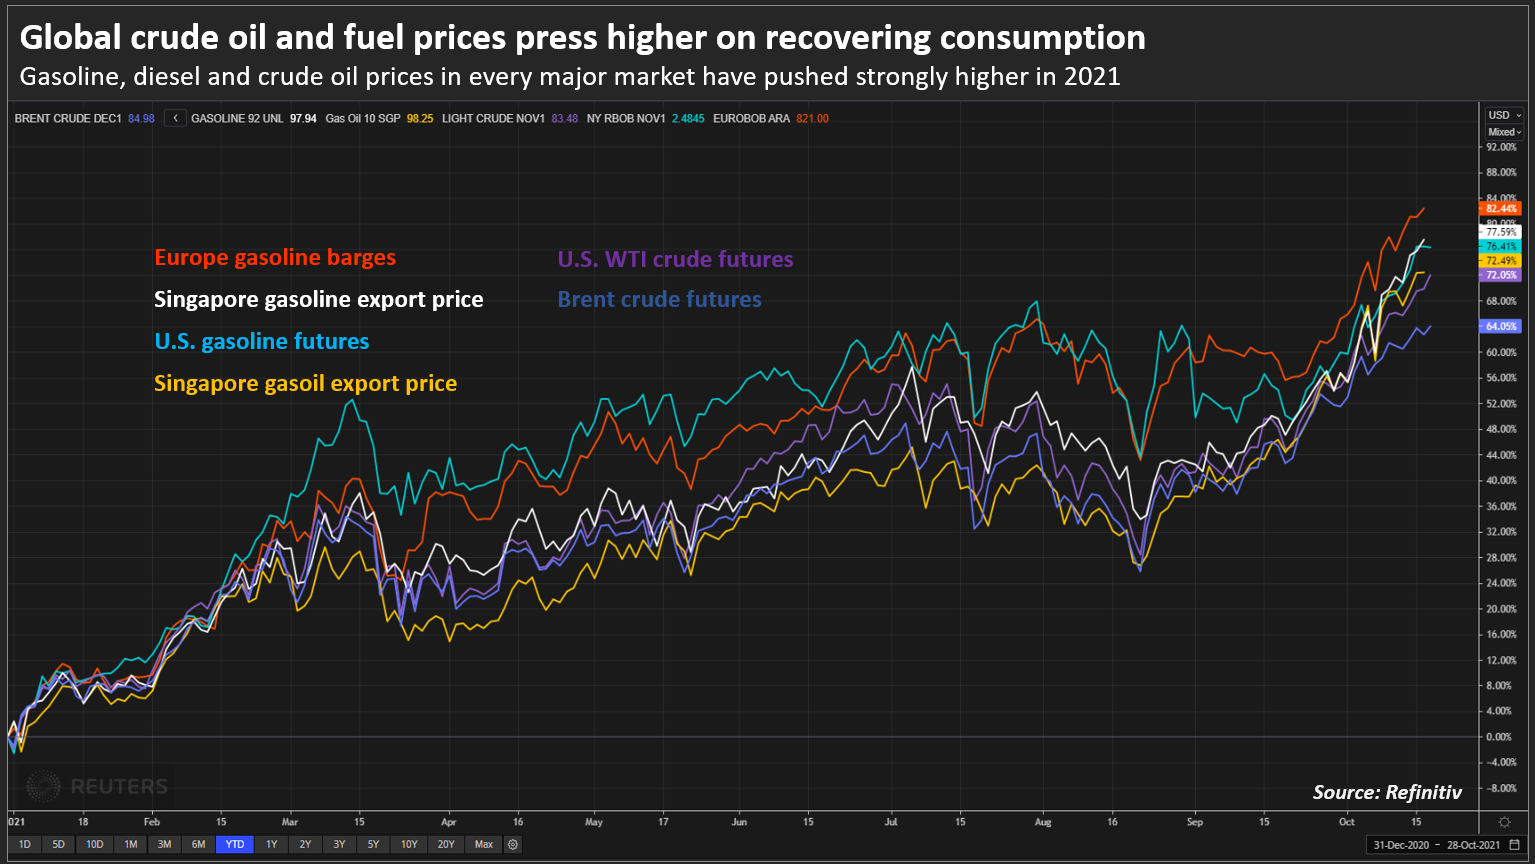 Global crude oil and fuel prices press higher on recovering consumption